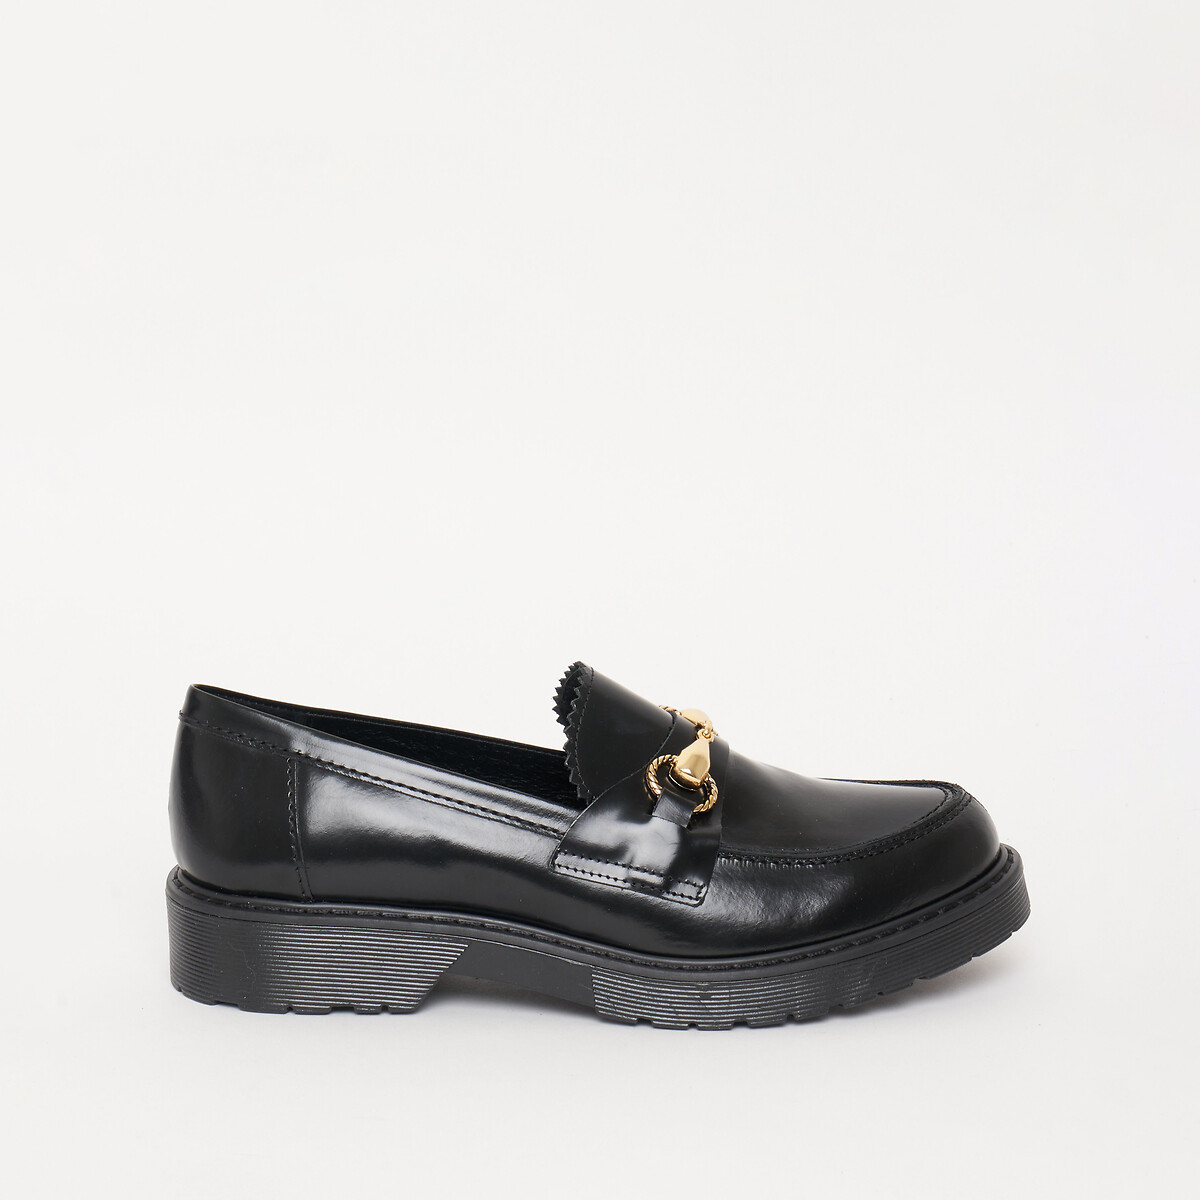 Come Patent Leather Loafers with Bar Trim